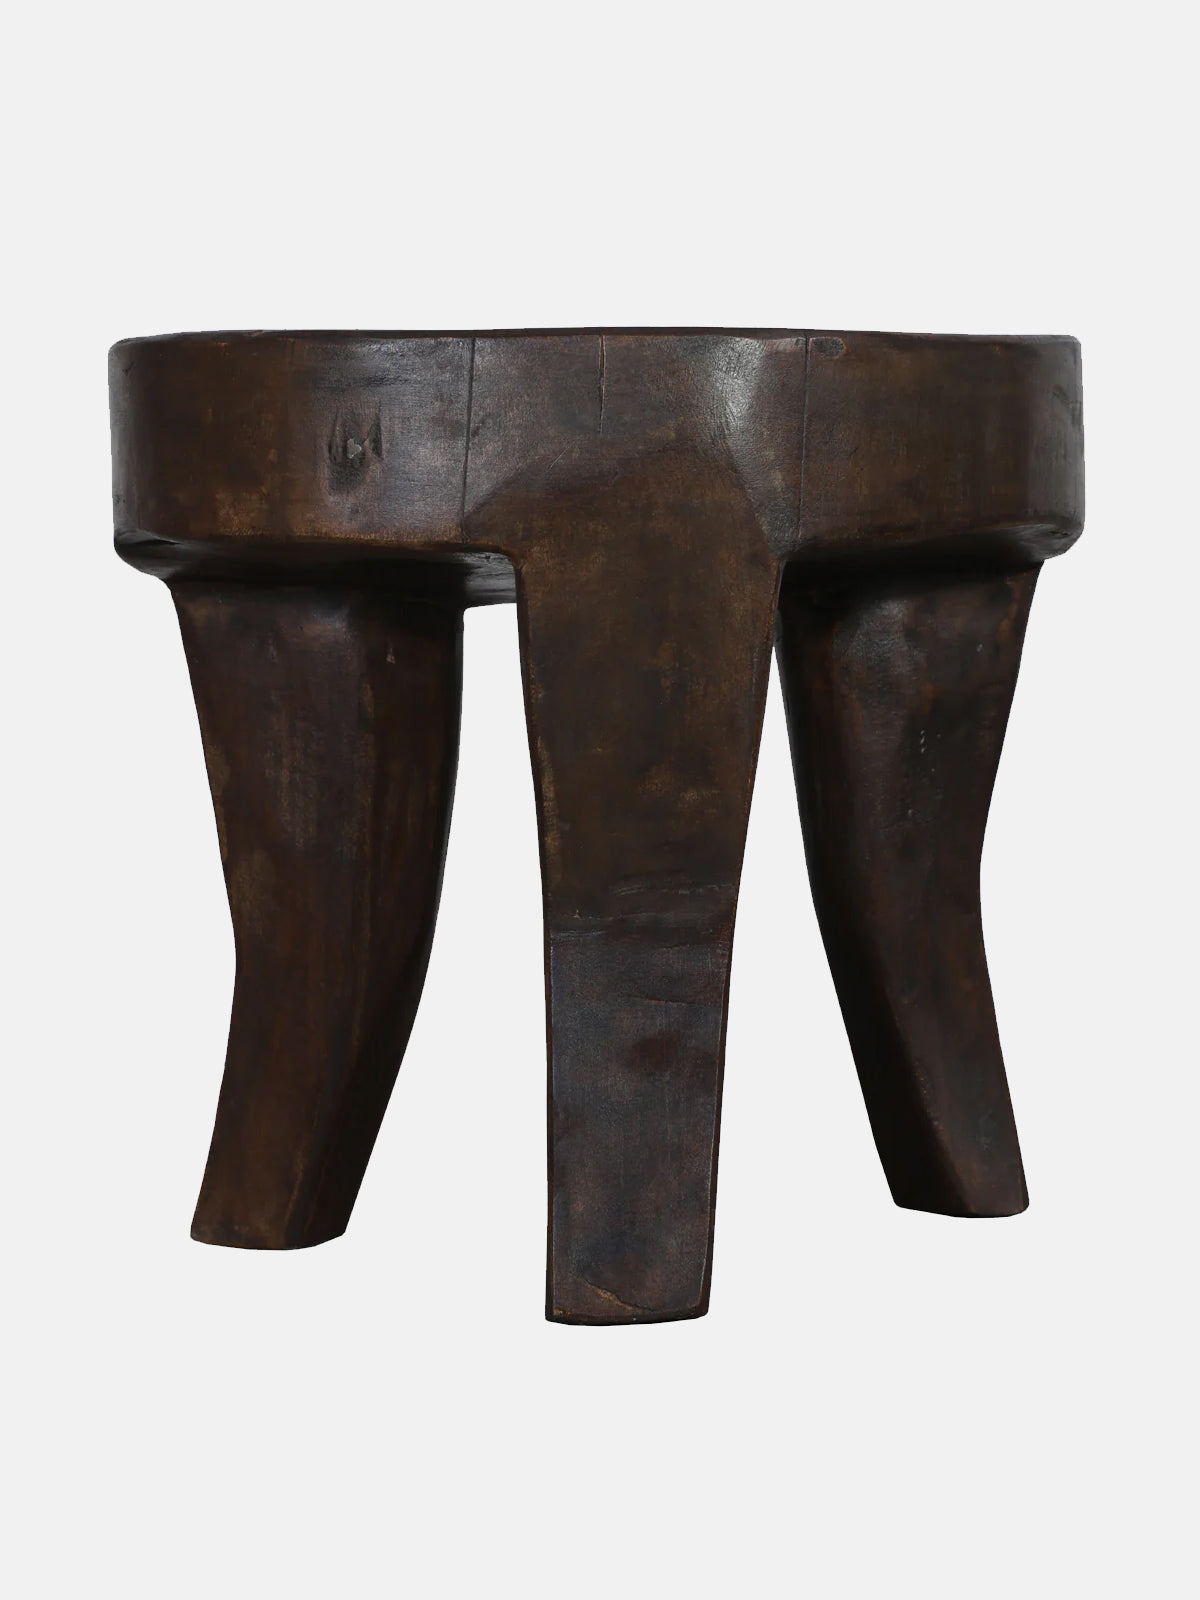 Nagaland Low Side Table